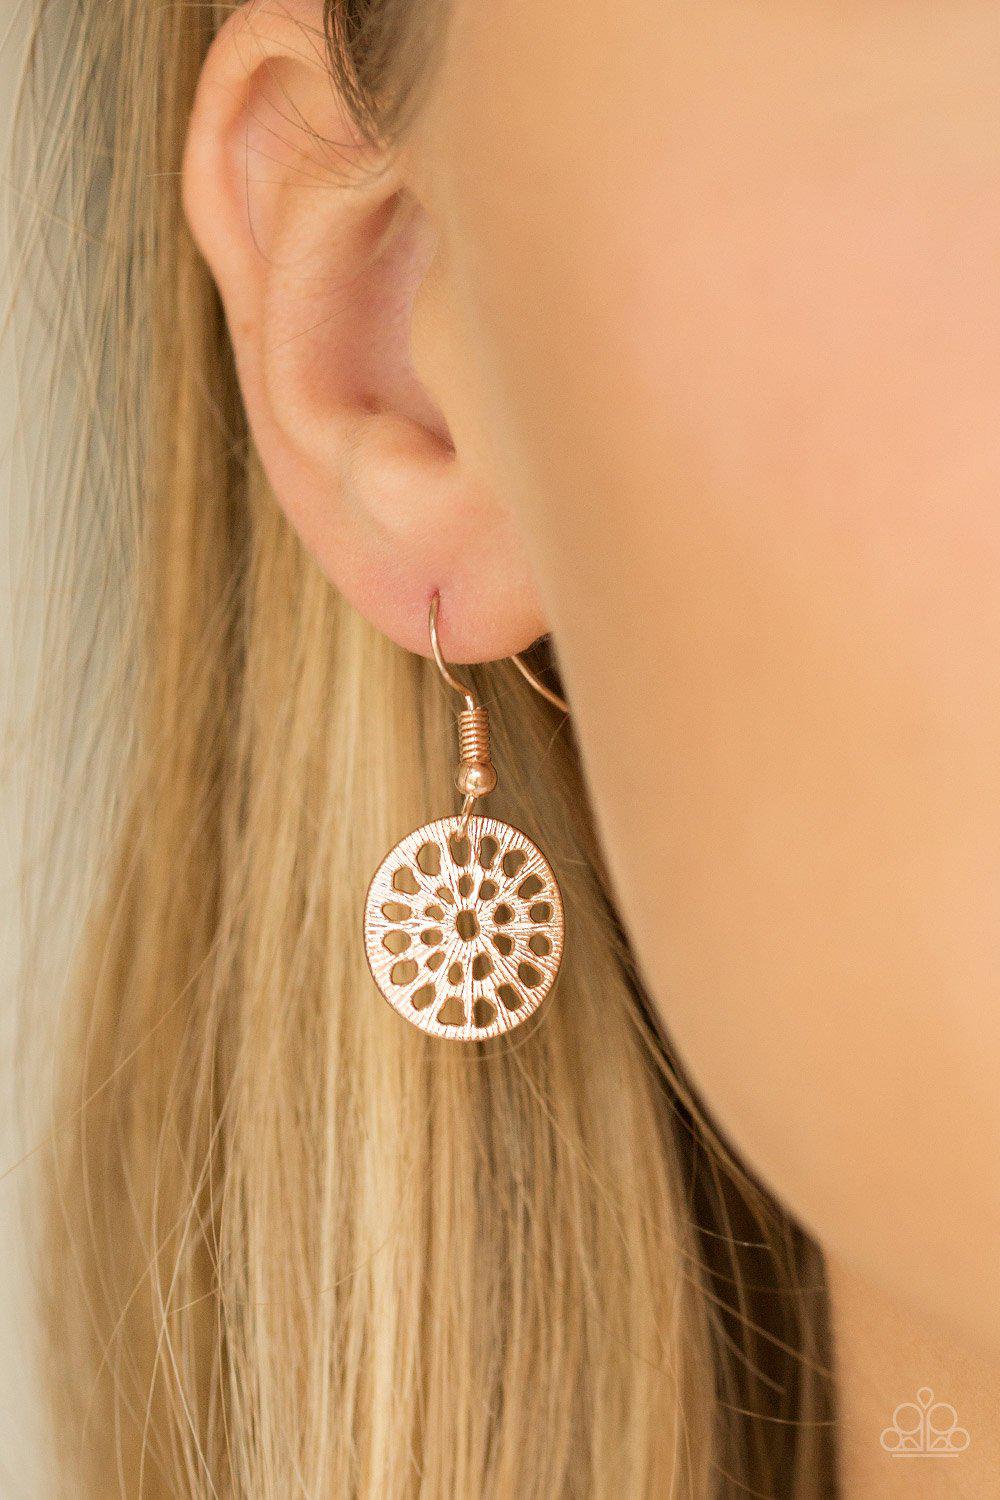 Your Own Free WHEEL Rose Gold Necklace - Paparazzi Accessories-free matching earrings -CarasShop.com - $5 Jewelry by Cara Jewels